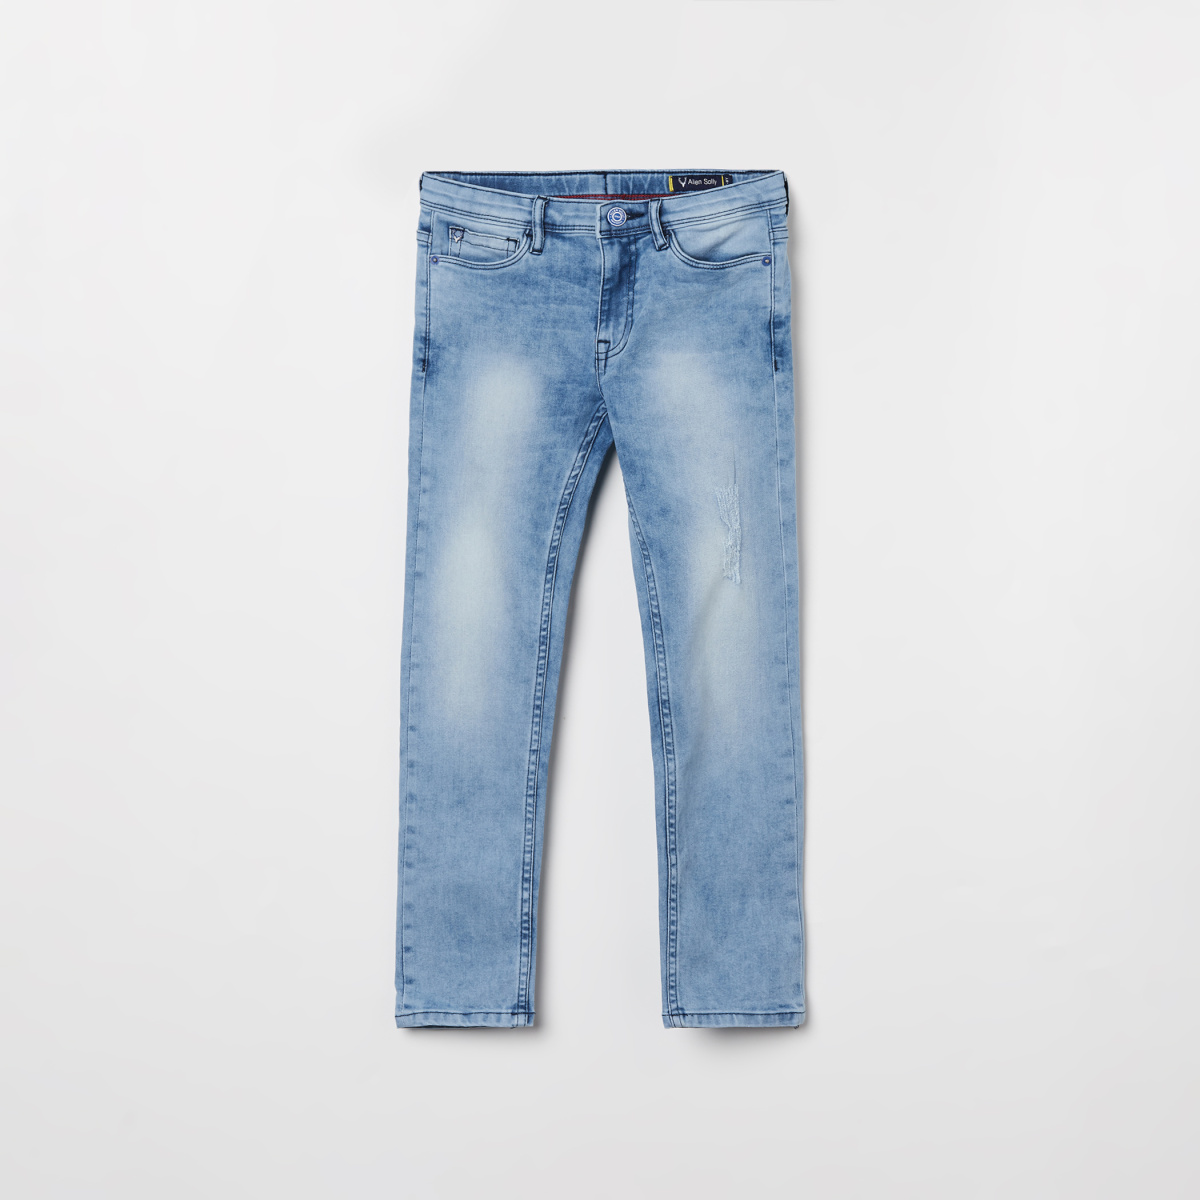 ALLEN SOLLY Boys Stonewashed Skinny Fit Jeans